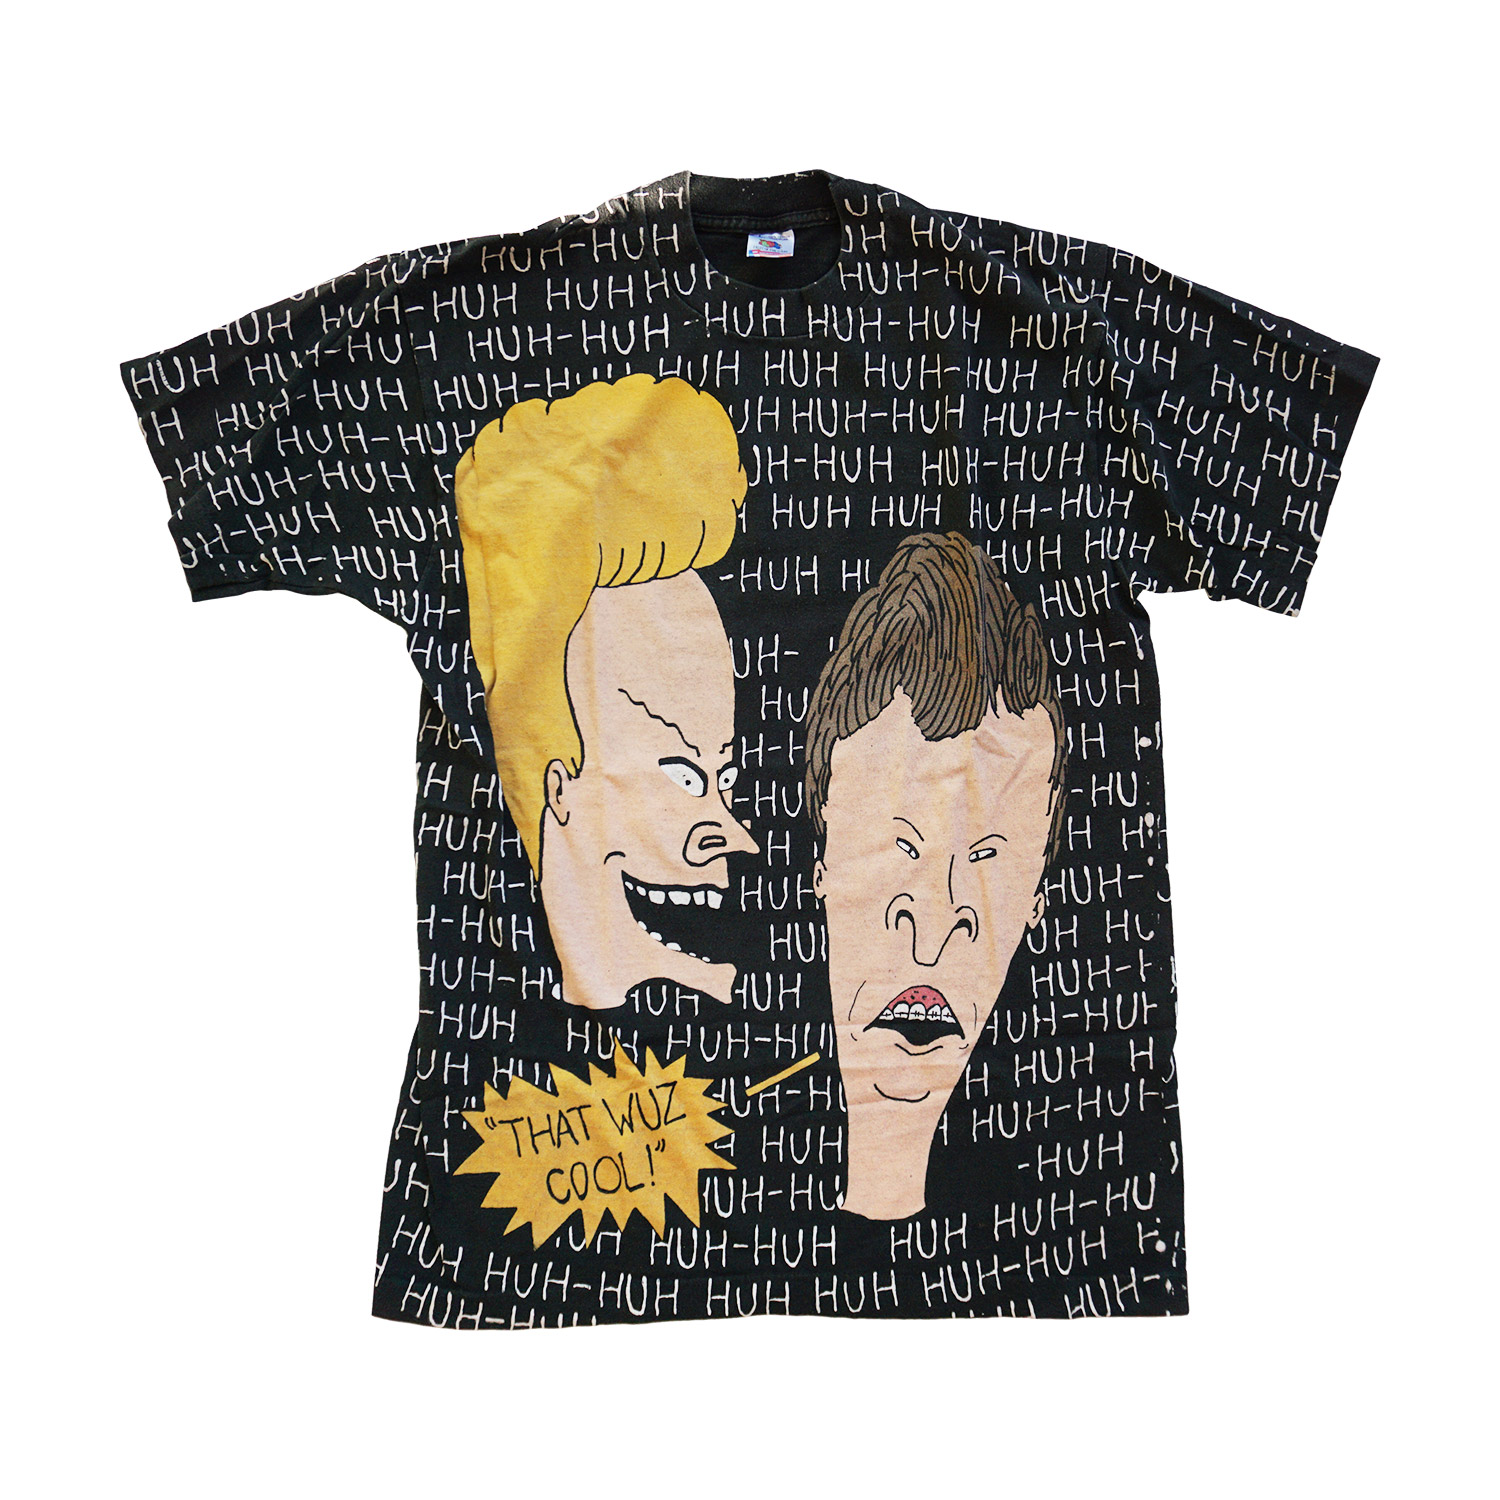 Vintage Beavis and Butt-Head T-shirt, All Over Print, Huh-Huh 